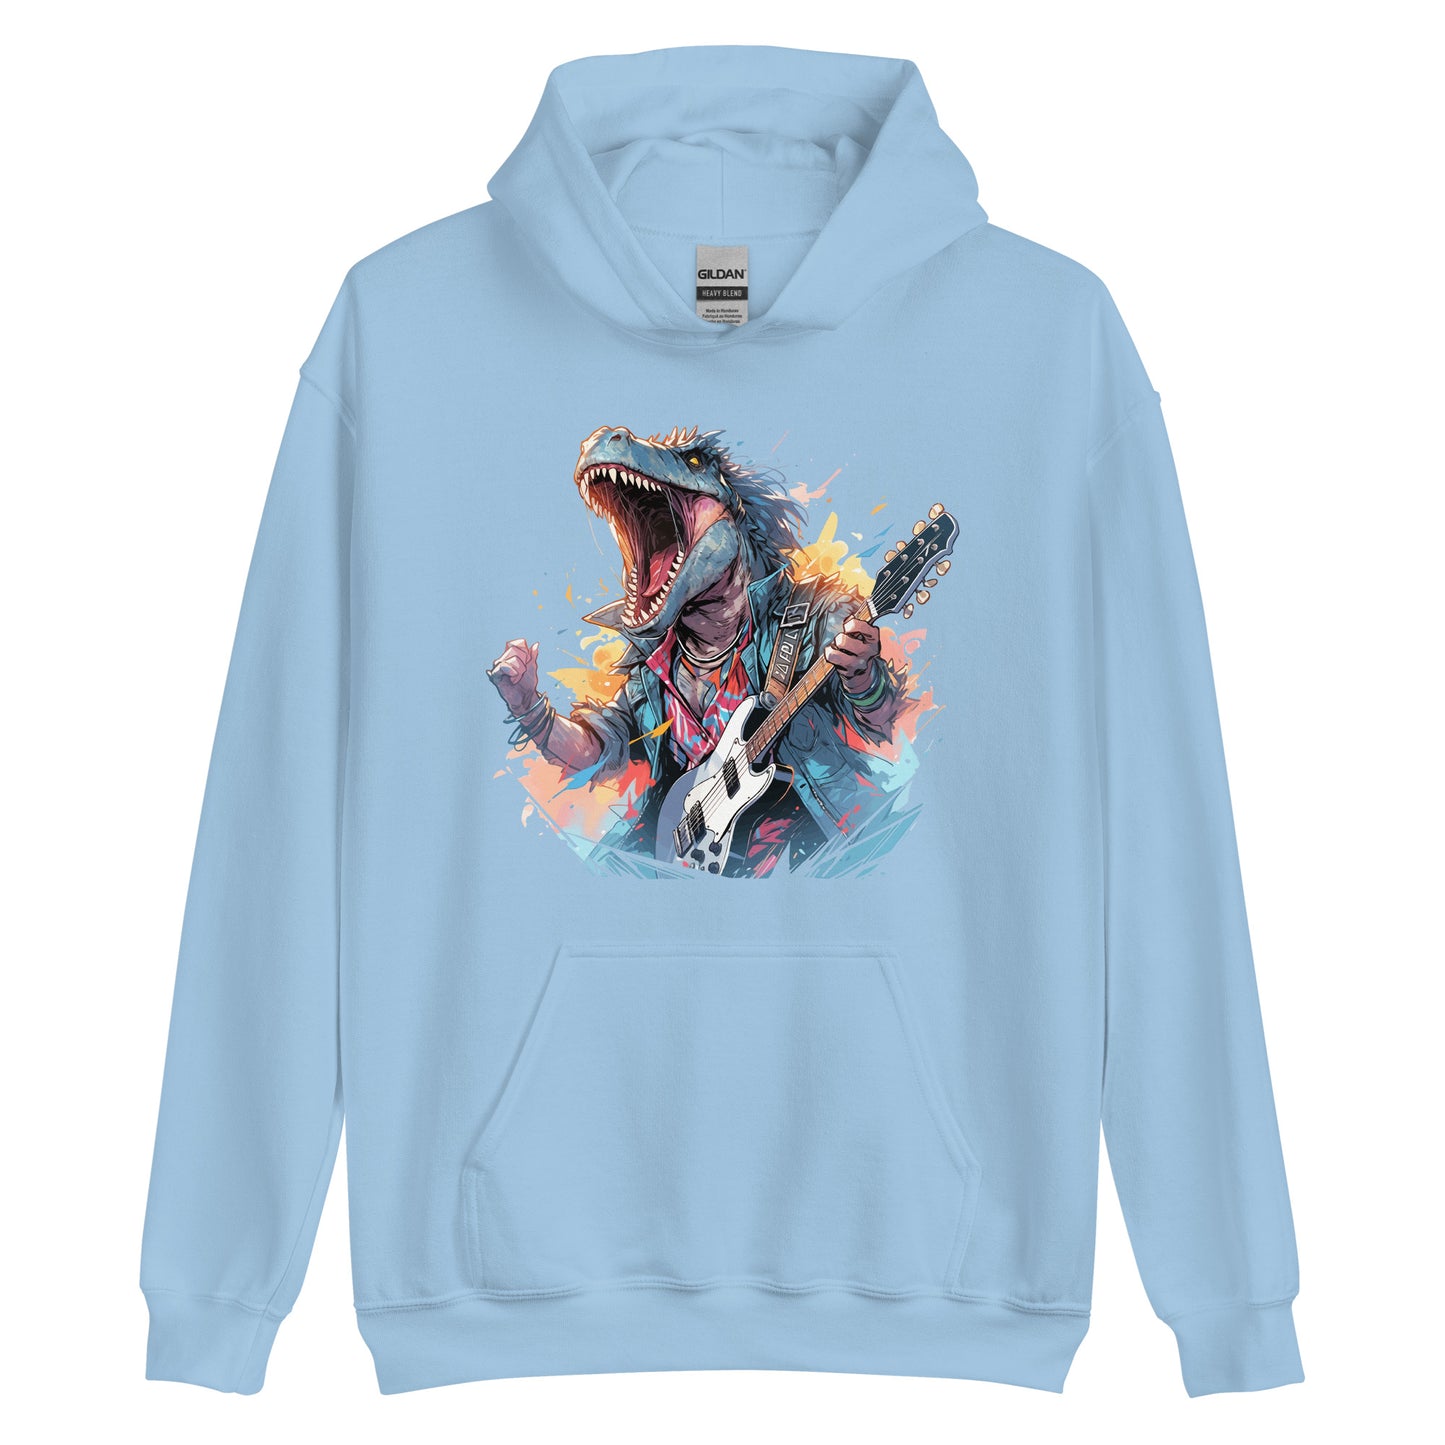 Dinosaur with guitar, Dino and sharp teeth of hard rock, Dragon rock and roll, Most music reptile in urban jungle - Unisex Hoodie